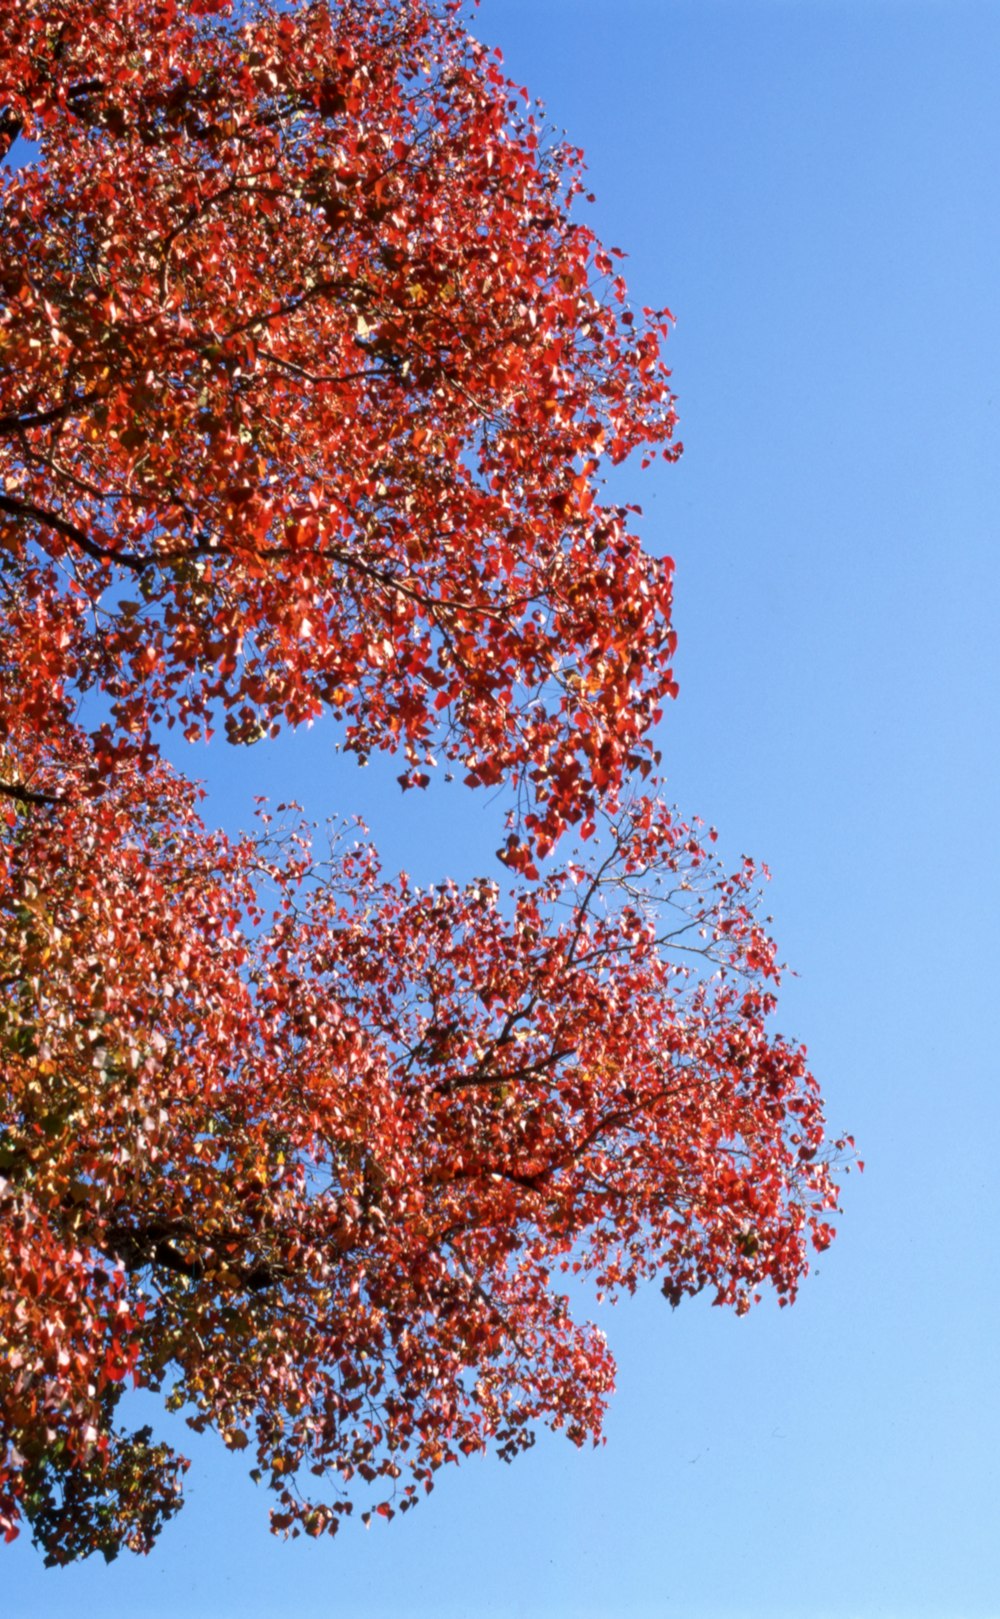 brown and green tree under blue sky during daytime